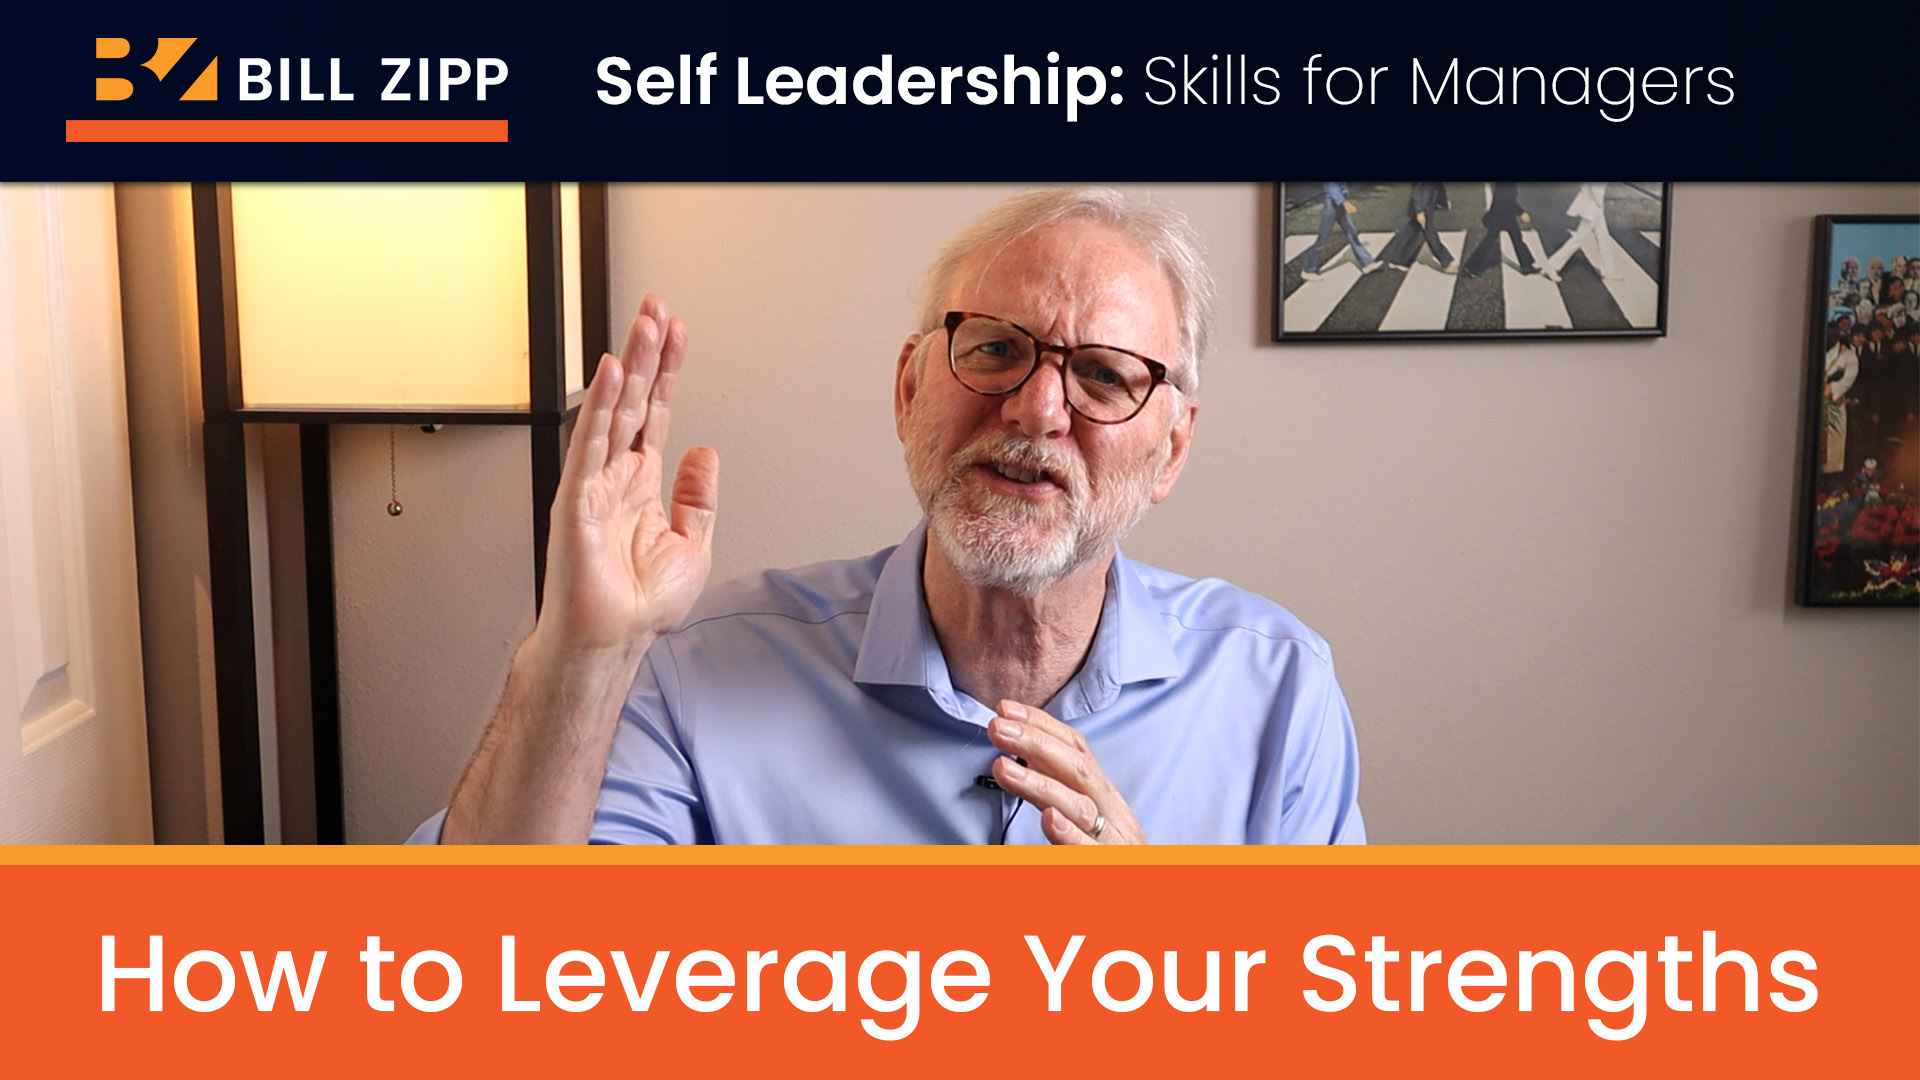 How to Leverage Your Strengths